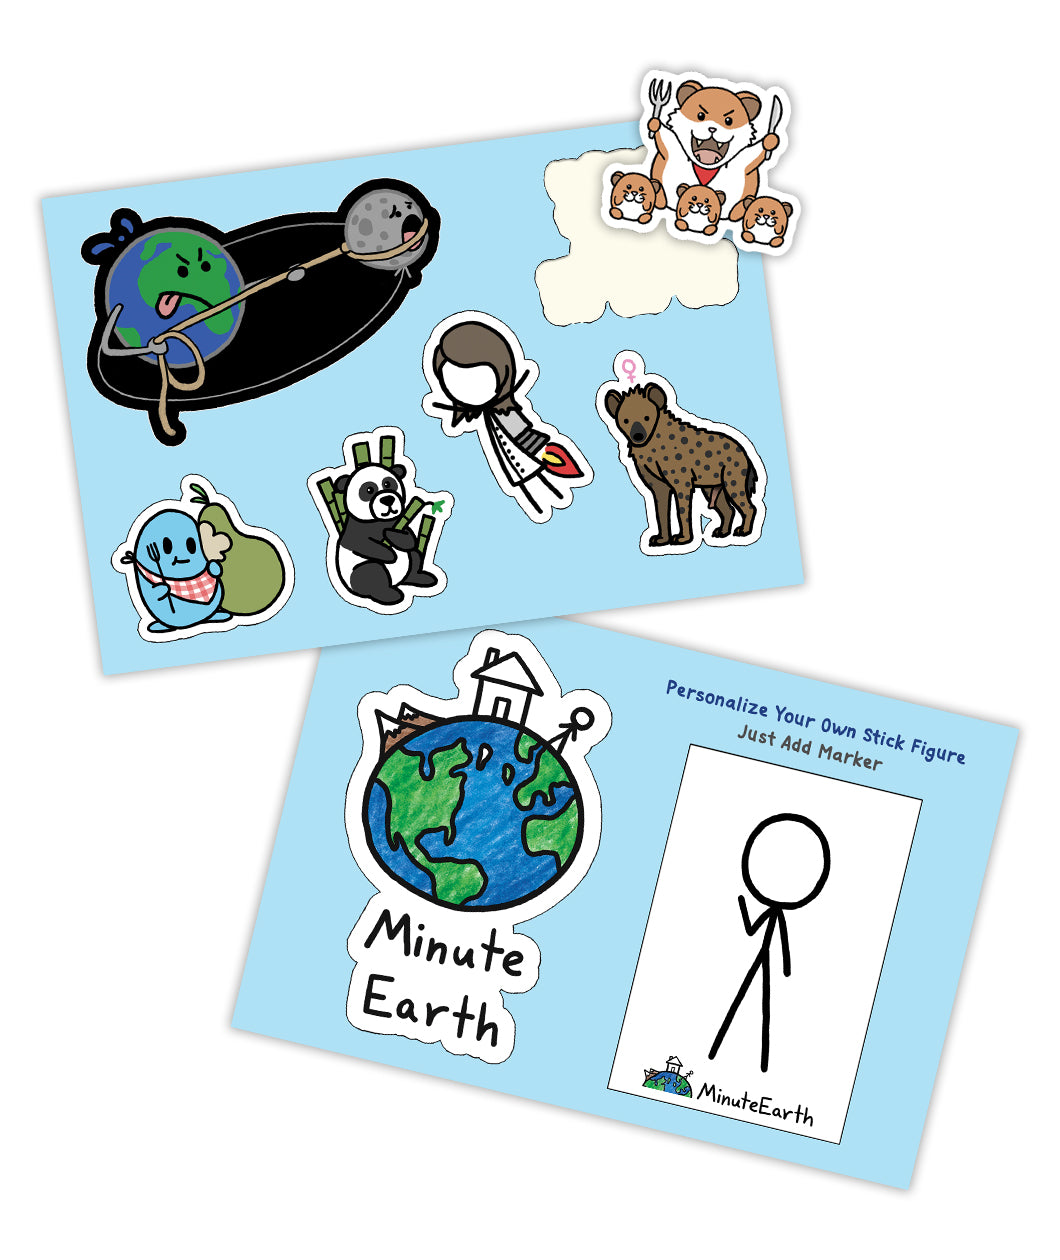 Two different sticker pages from MinuteEarth. One sheet has a sticker of a drawn earth with mountains, a house and stick figure on top and 